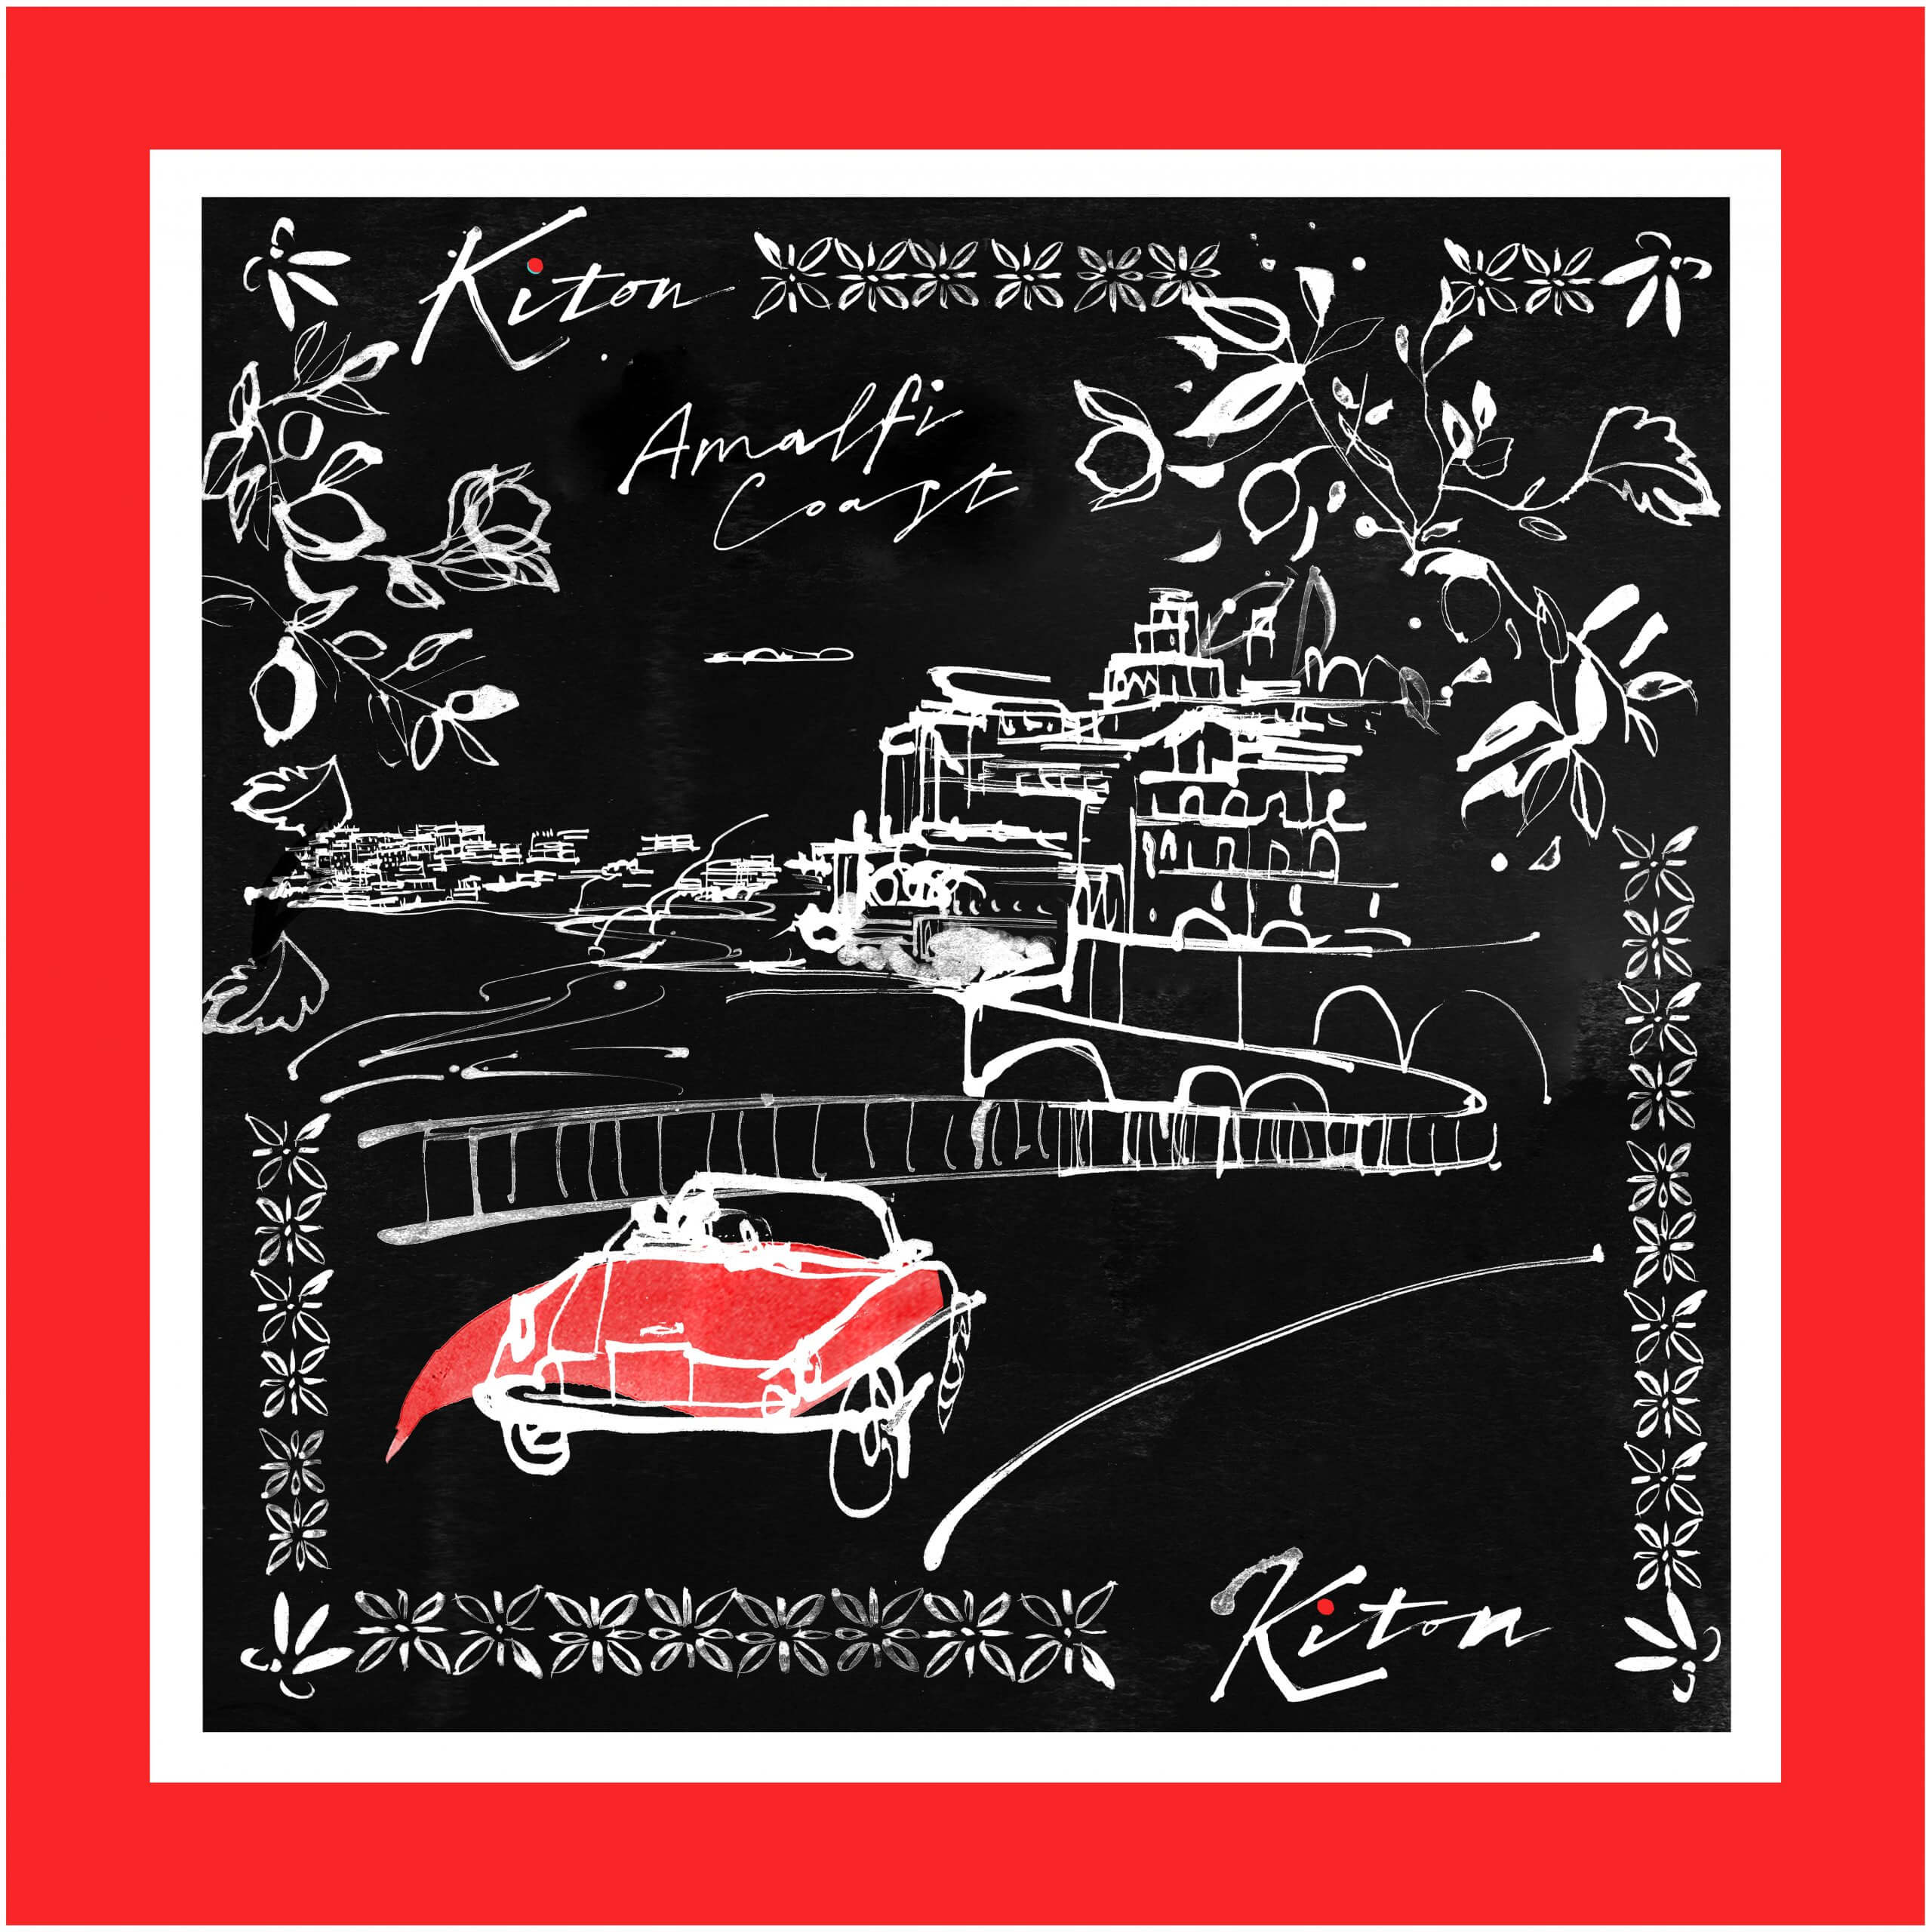 In celebration of the famous Amalfi Coast the Italian fashion house Kiton commissioned an illustration for a luxury printed silk scarf. Simple line illustration of the coast line complete with an iItalian sports car whizzing around the corner.